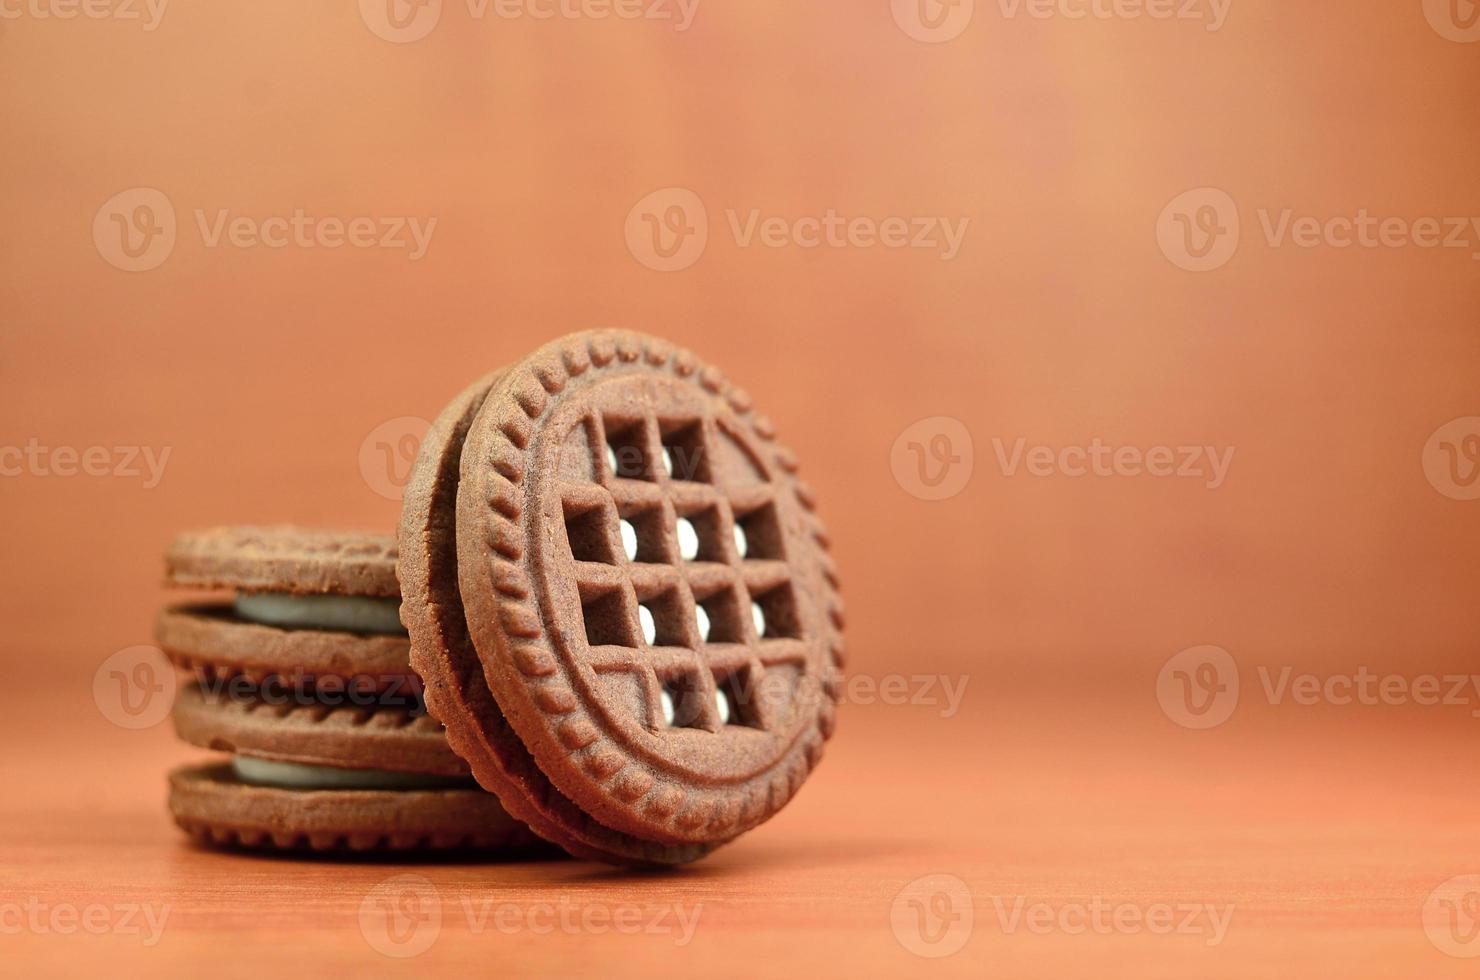 Sandwich round biscuits with vanilla filling photo